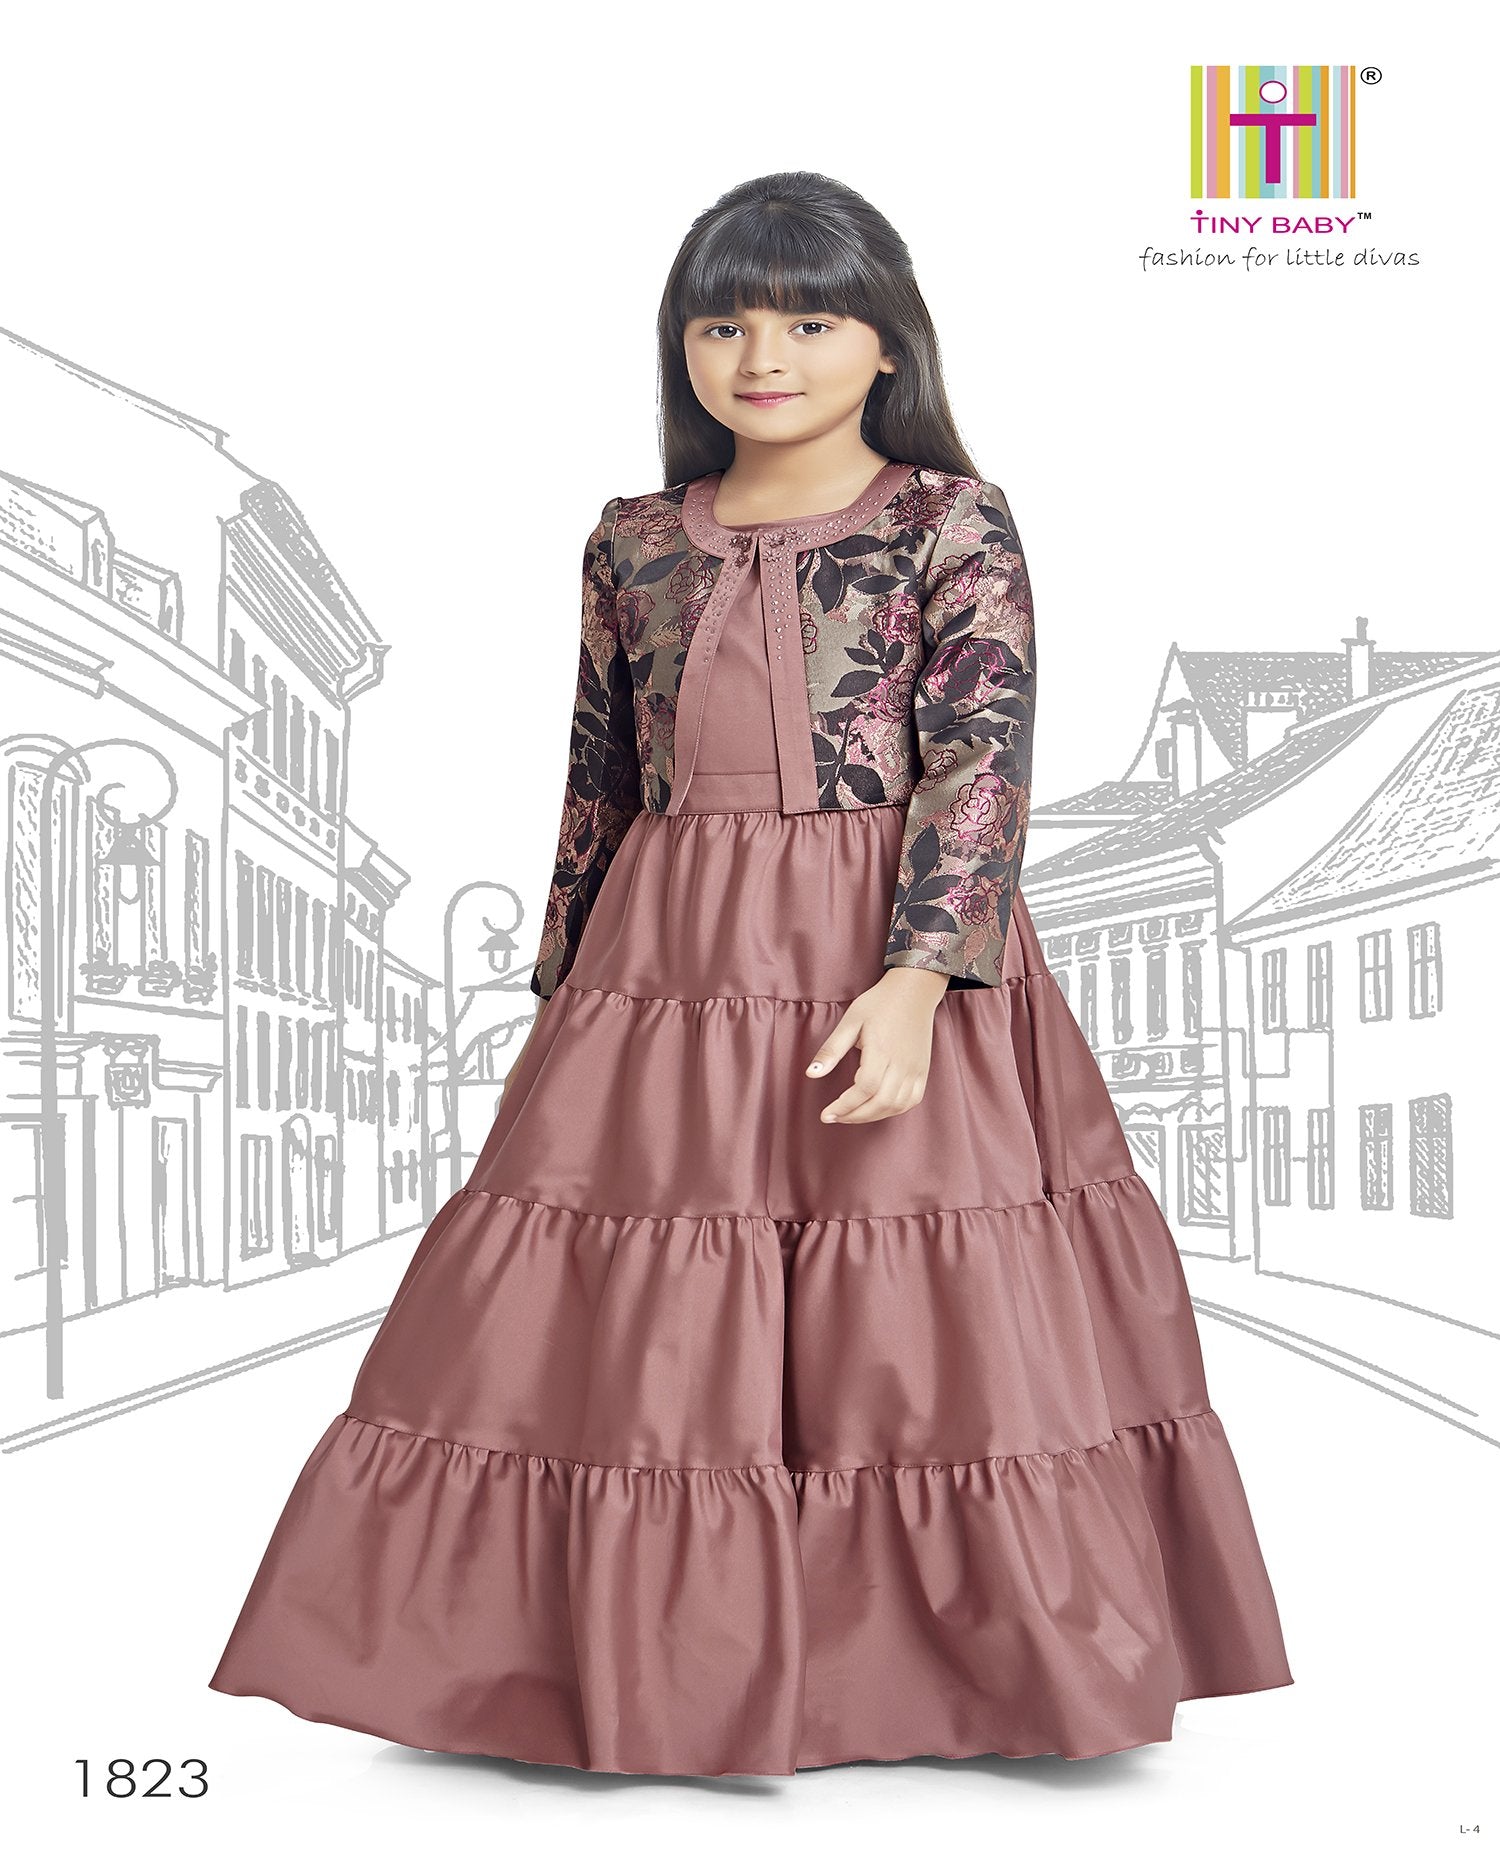 Solid Pattern Brick Colored Gown - 1823-Brick - TINY BABY INDIA shop.tinybaby.in